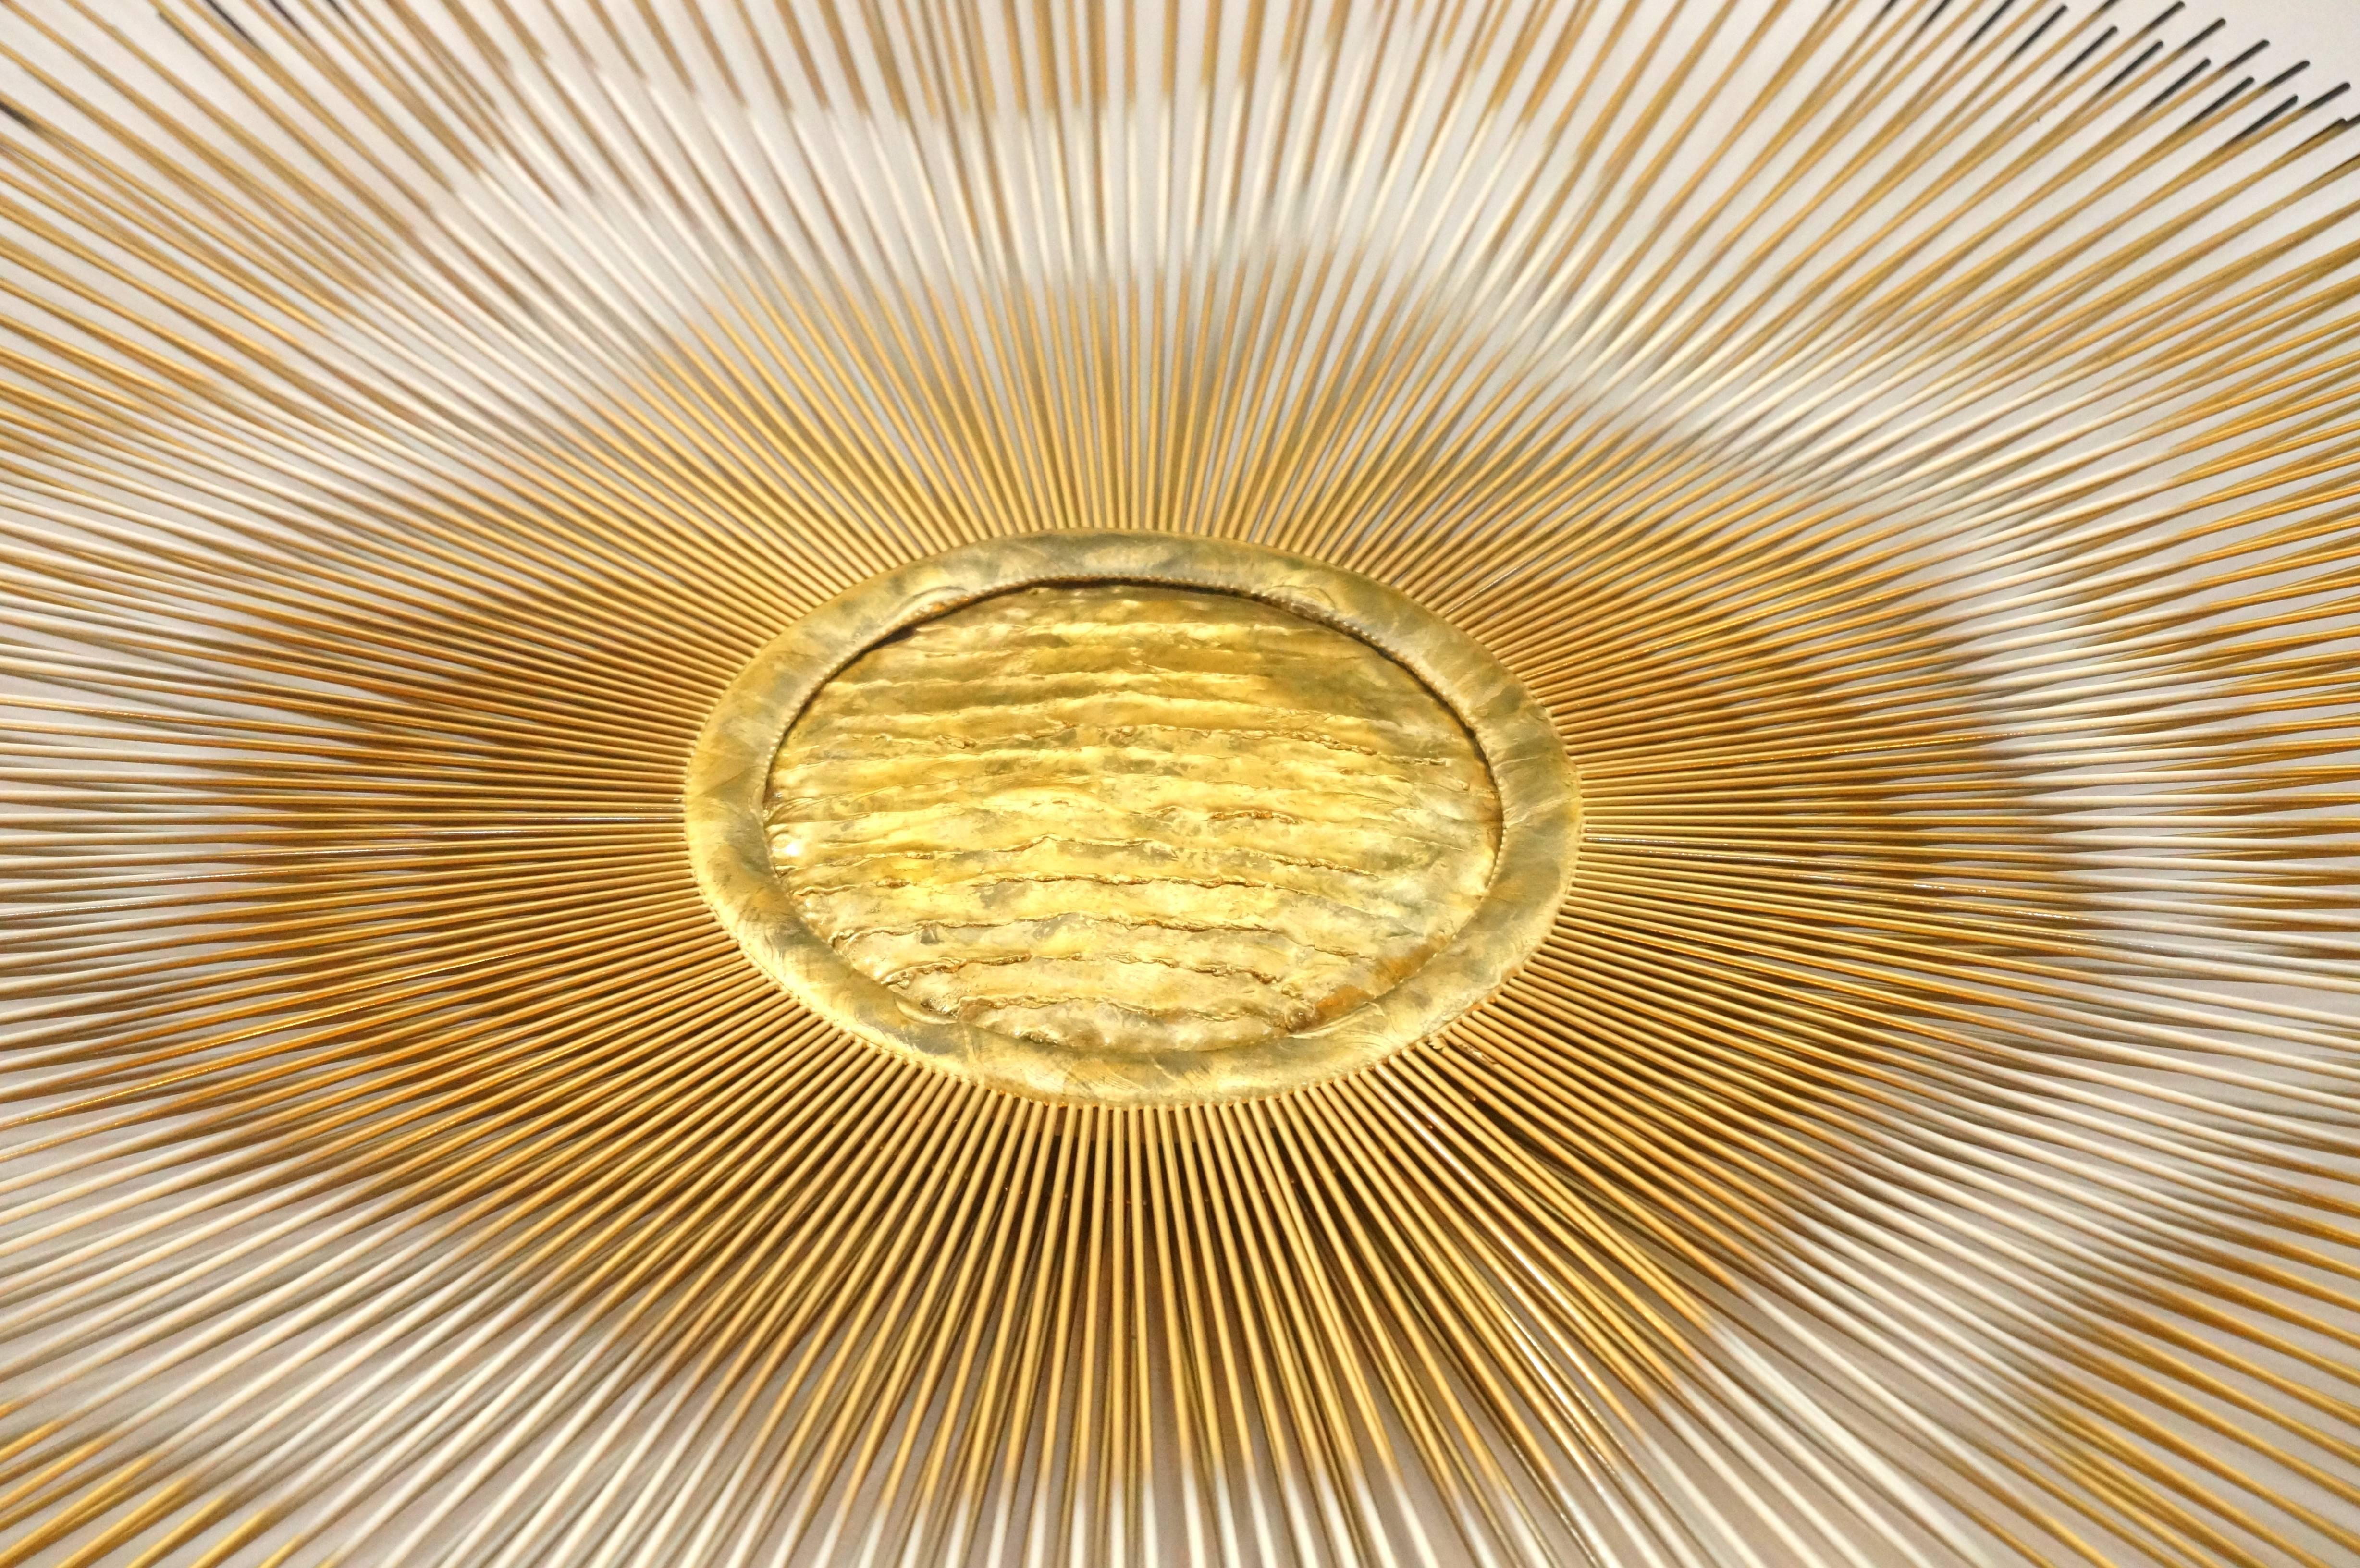 American Curtis Jere Wall-Mount Sunburst Sculpture in Burnished Gold, Brass and Copper